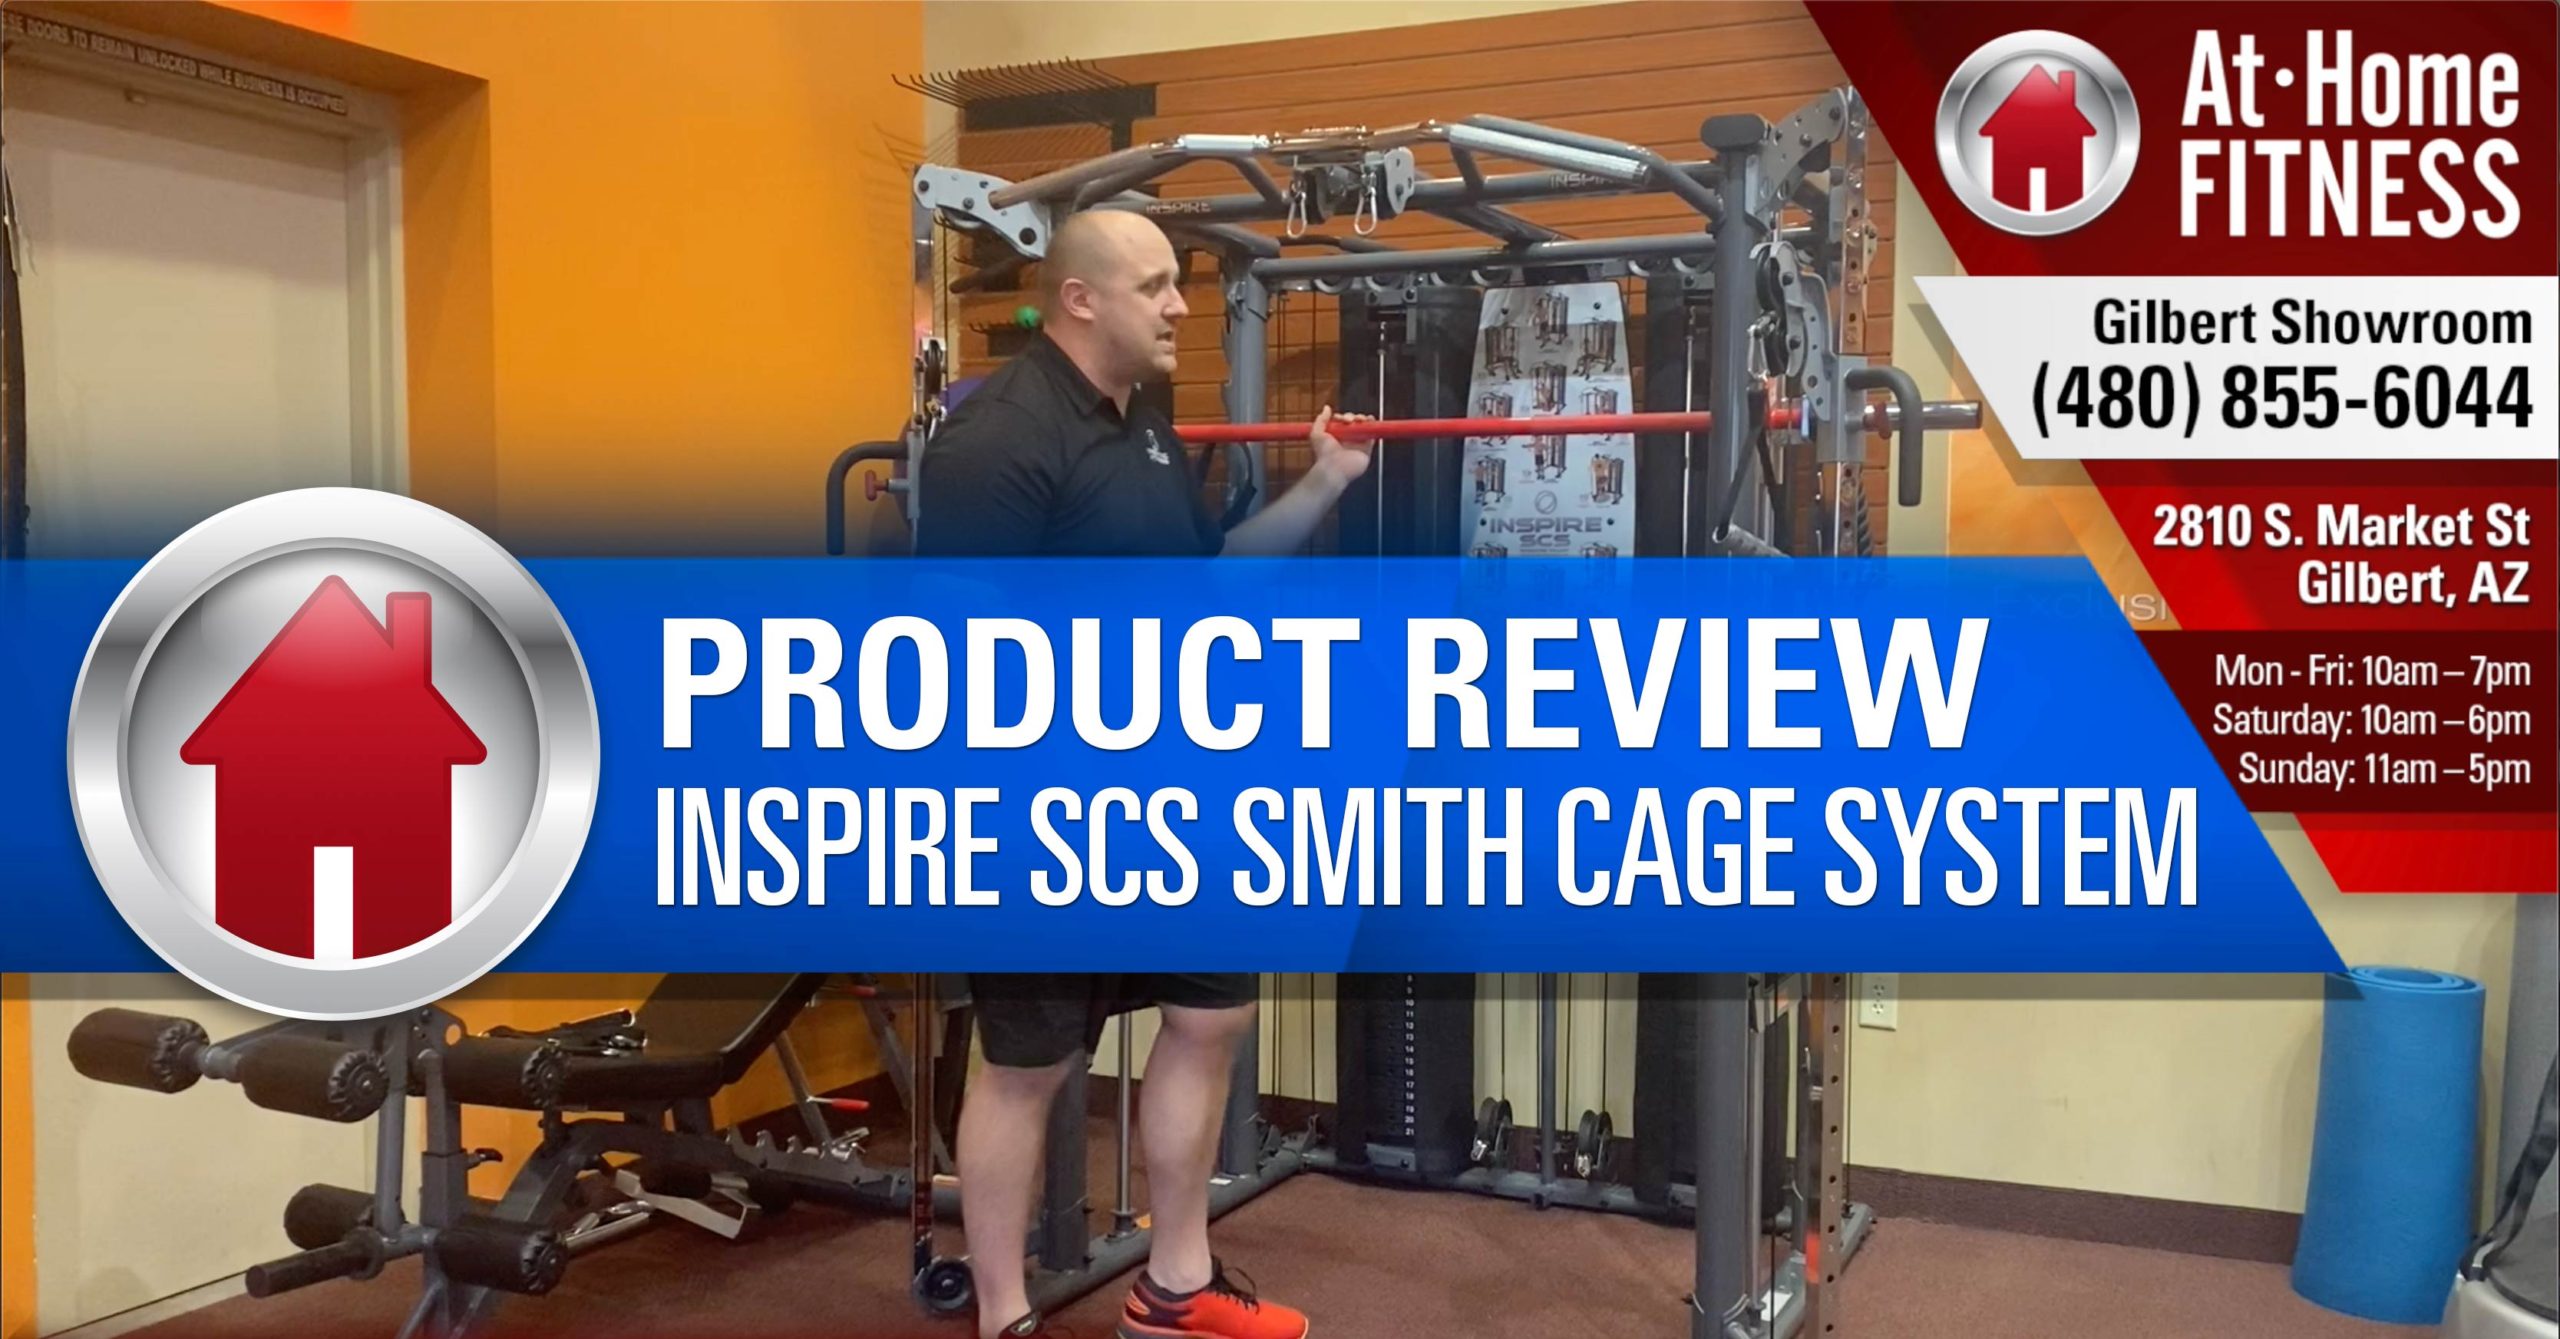 Inspire SCS Smith Cage System gives owners the ultimate home gym